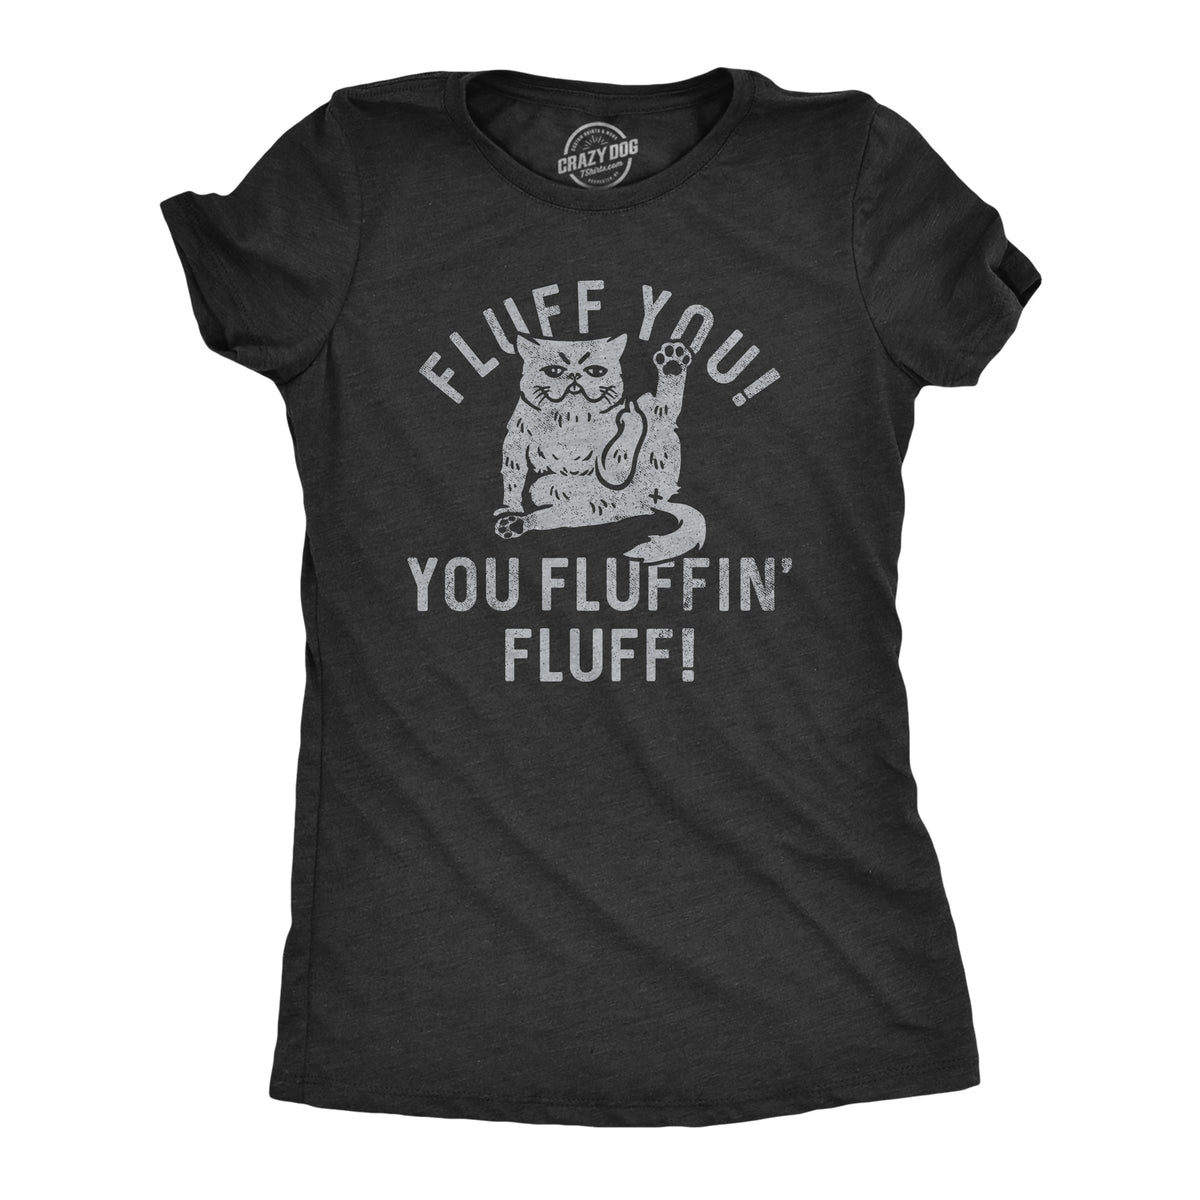 Funny Heather Black - FLUFF Fluff You You Fluffin Fluff Womens T Shirt Nerdy Cat sarcastic Tee